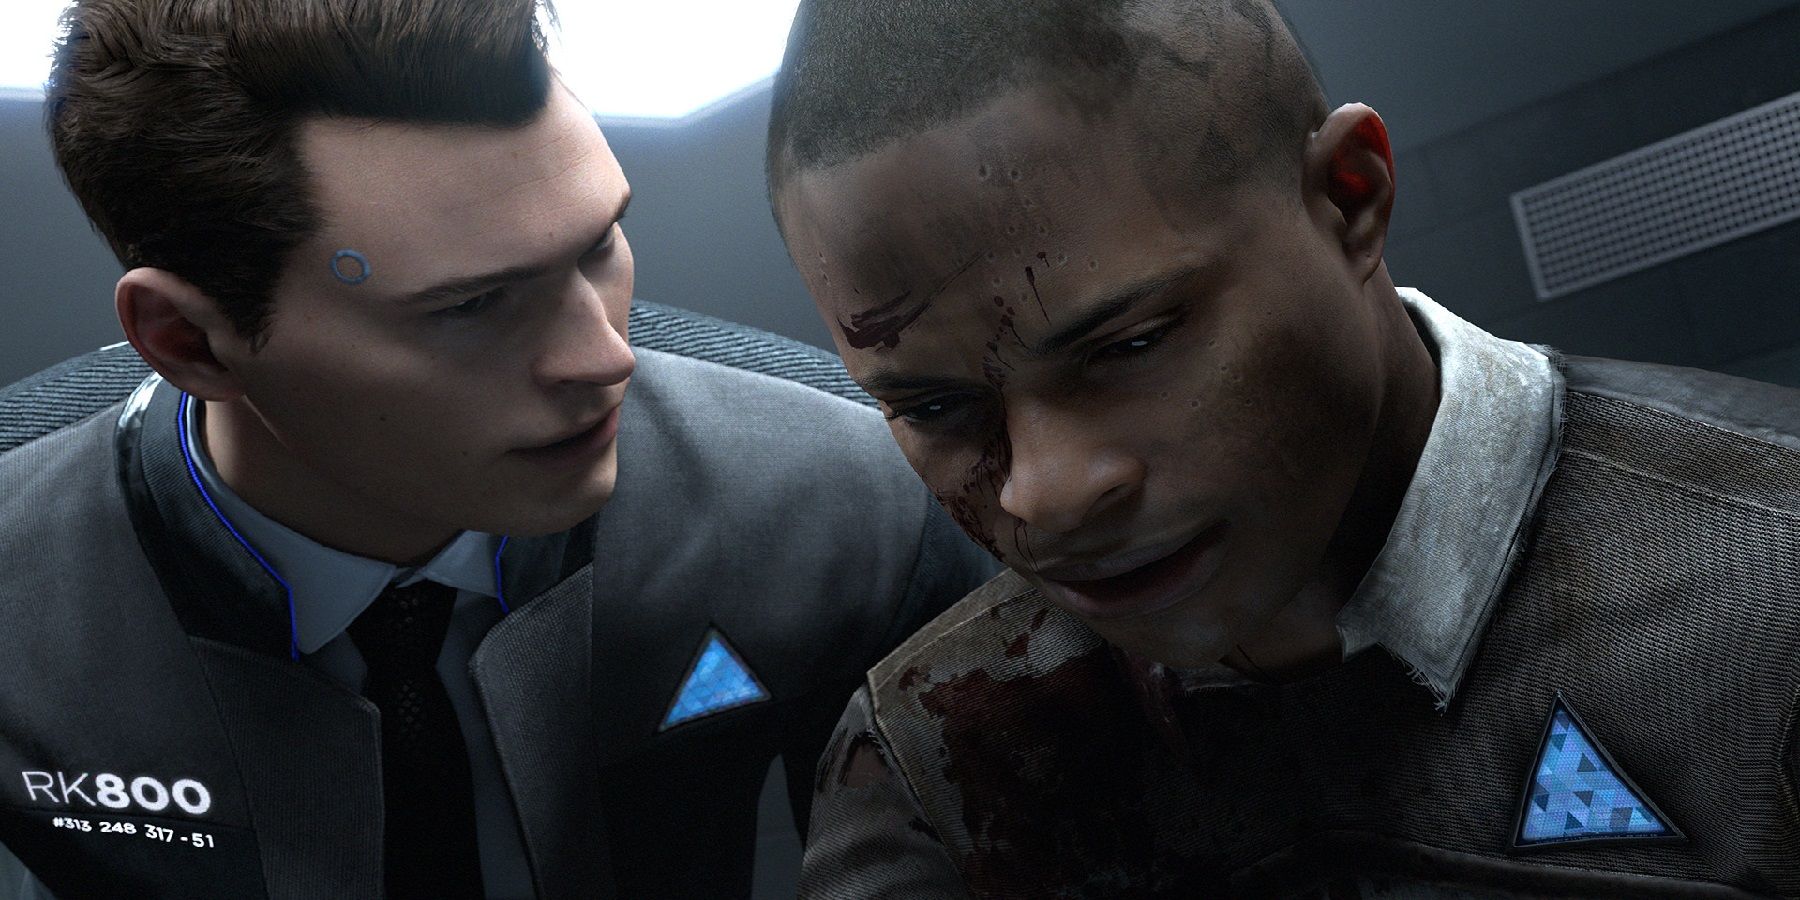 Detroit: Become Human - Tokyo Stories Officially Announced